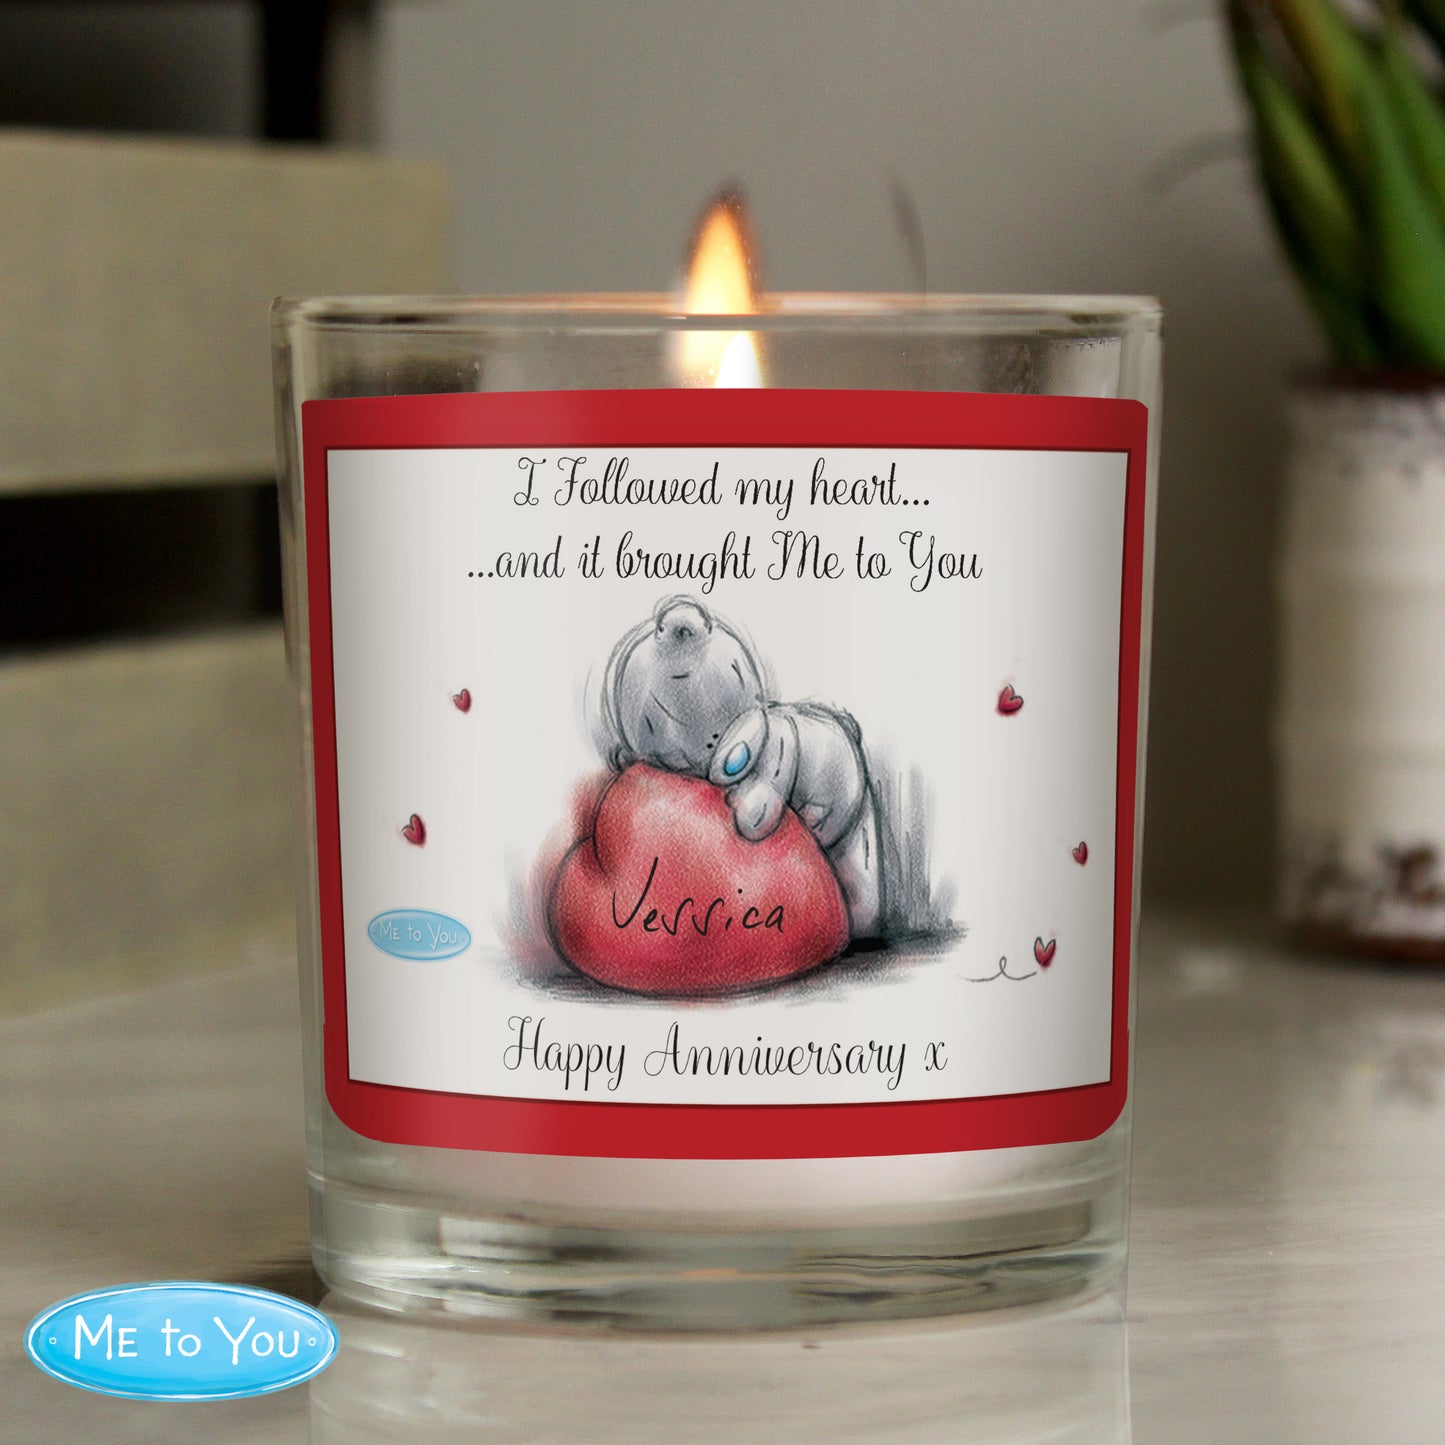 Personalised 'Me To You' Heart Scented Jar Candle - Perfect for Valentine's Day